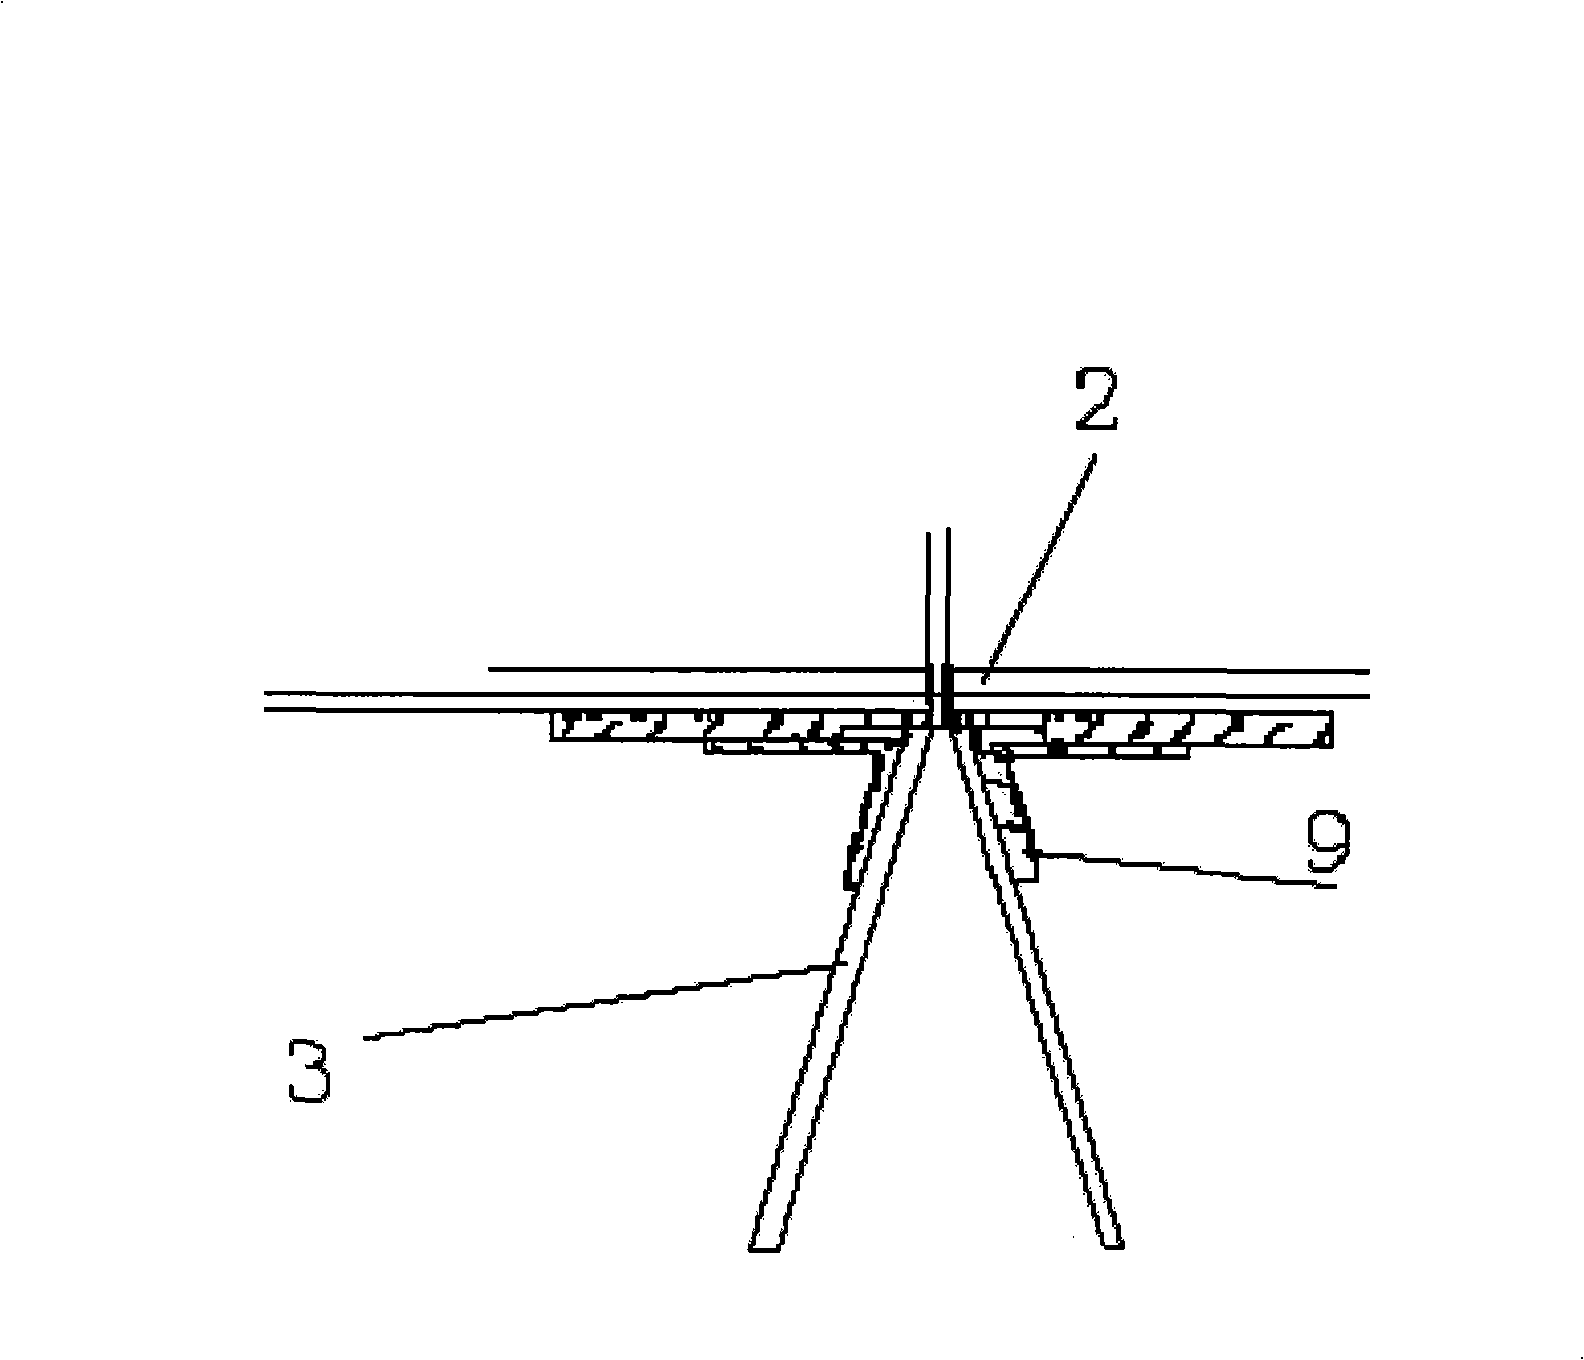 Double-light path high-efficiency fluorescence gathering system